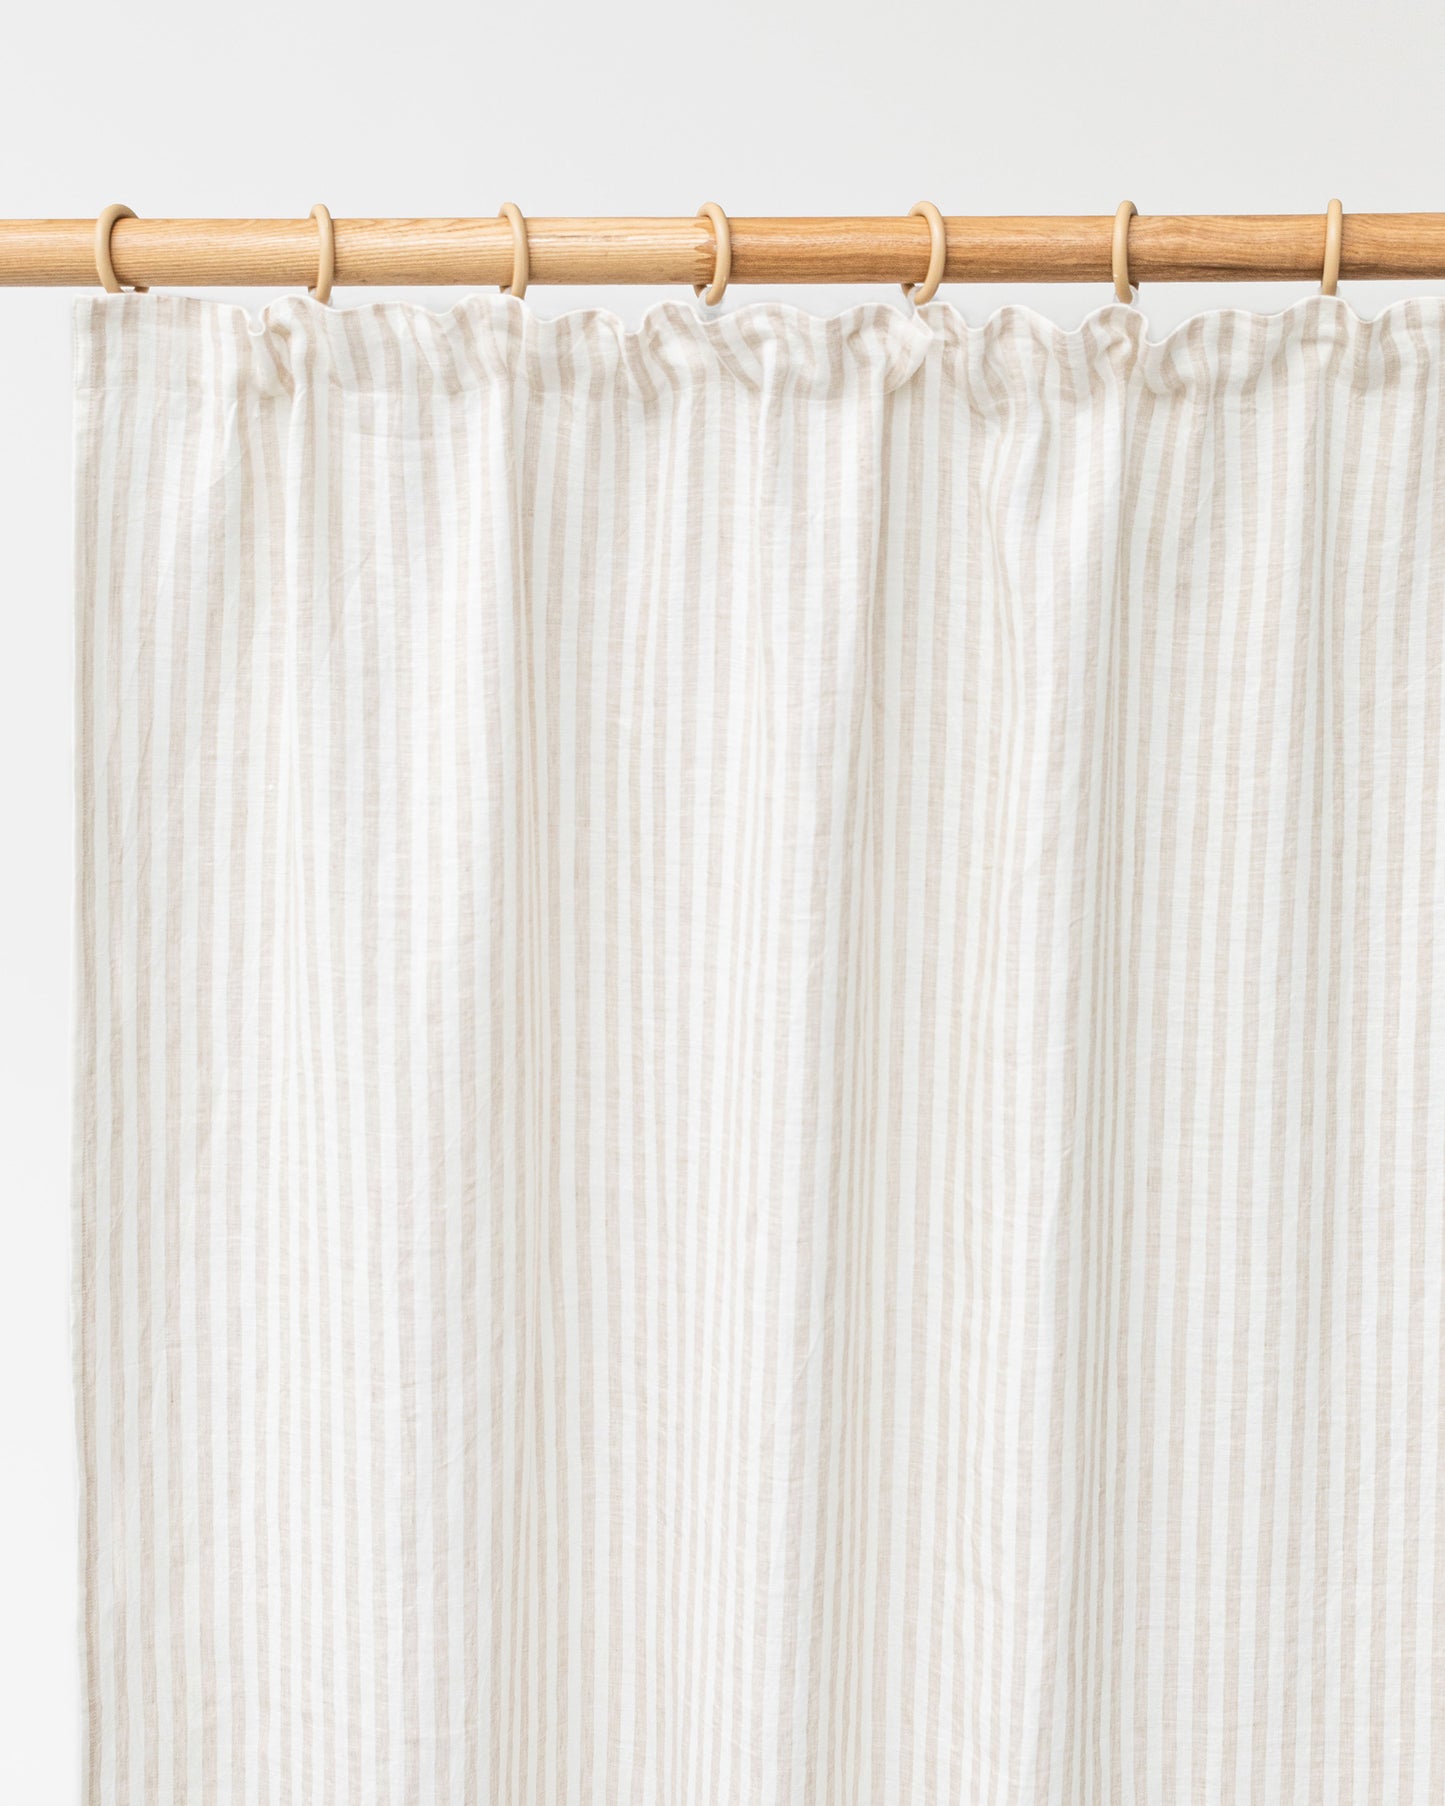 Pencil pleat linen curtain panel (1 pcs) in Striped in natural - MagicLinen